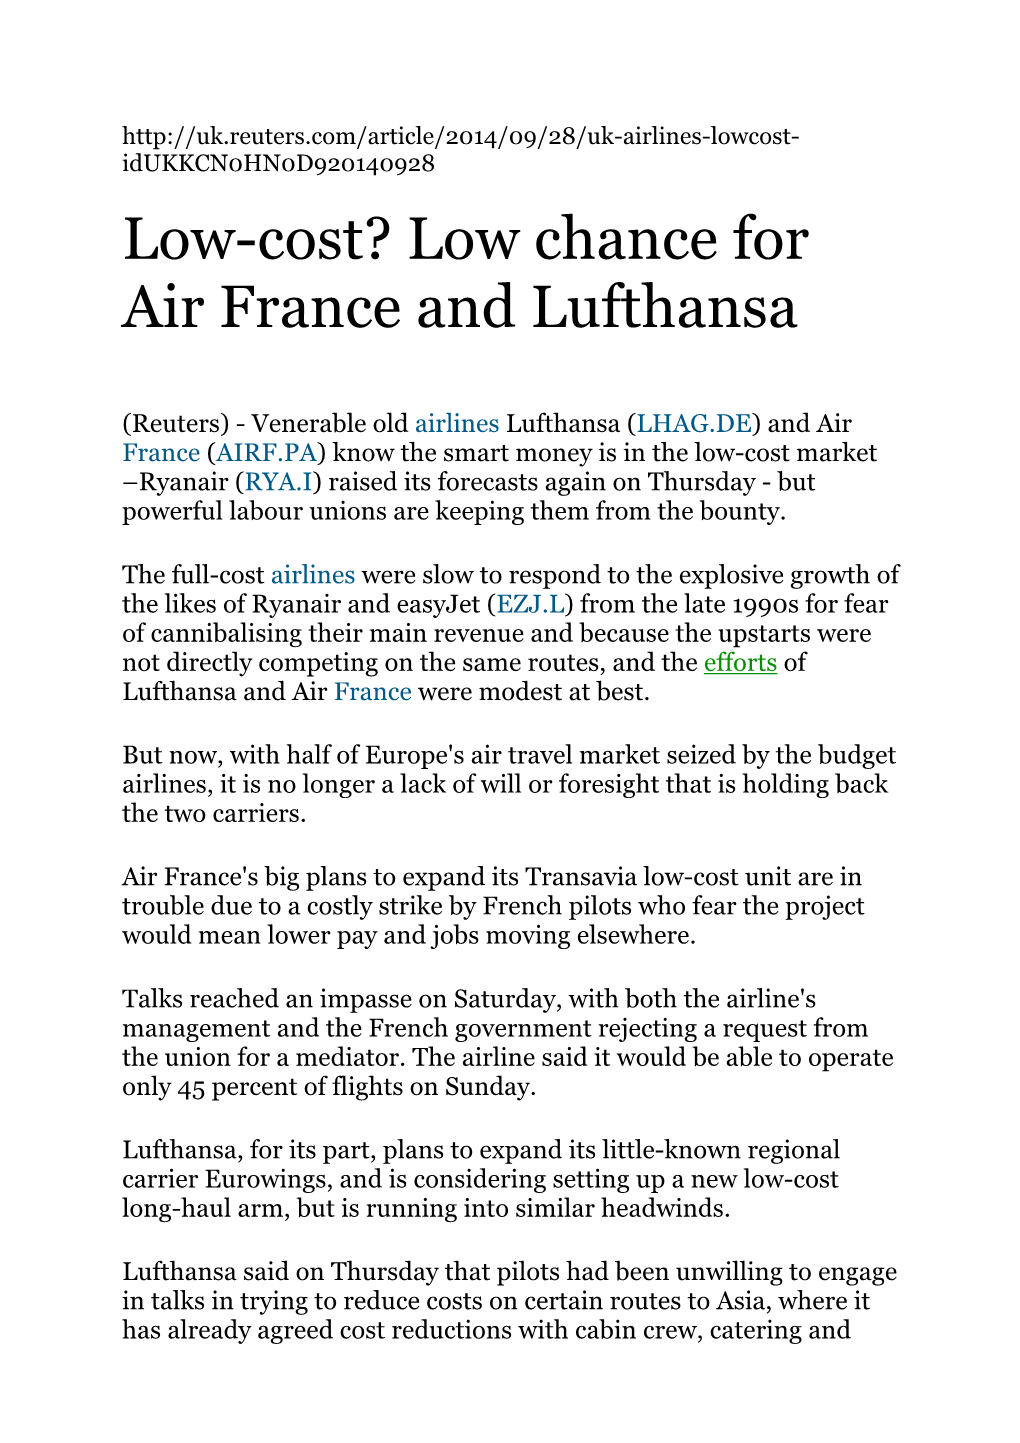 Low-Cost? Low Chance for Air France and Lufthansa